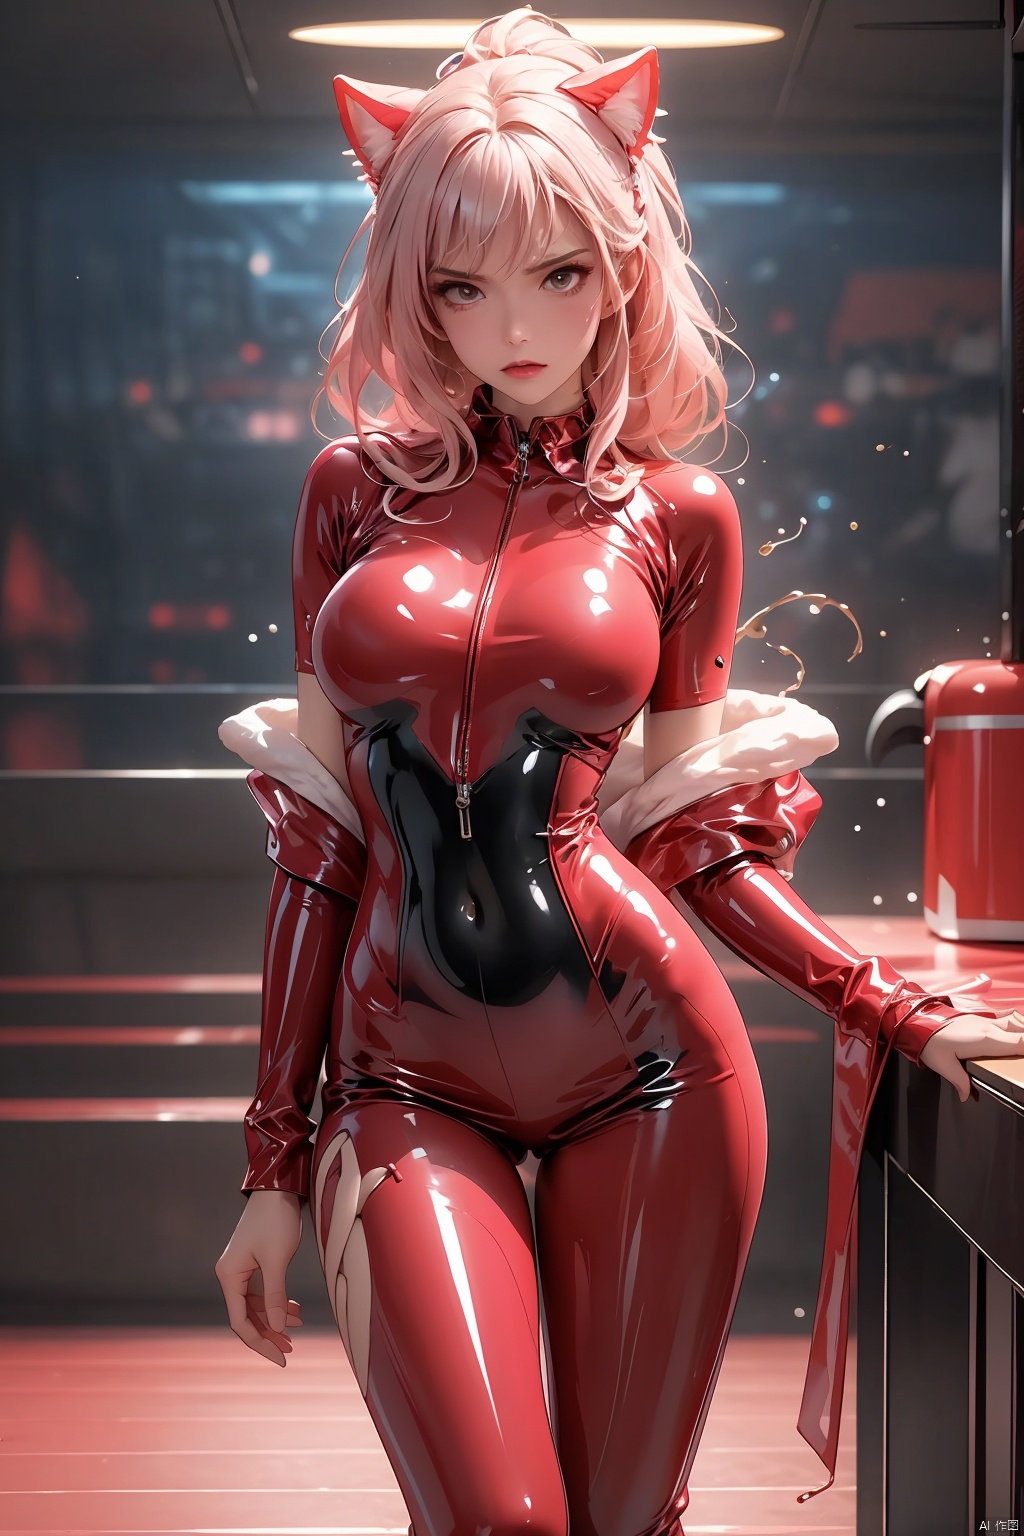  (RAW photo: 1.2), pink latex jumpsuit, hollow, Holt collar, latex shiny, tight, sweat, white liquid, pink body, wearing Kudo Atsuko latex costume, wearing tight suit, smooth pink white skin, cat suit, wearing latex, shiny plastic, shiny metallic luster skin, pink glowing color, latex costume, chrome-plated bodysuit, cyberpunk glossy latex suit, shiny, futuristic bright latex suit with open legs, M-shaped legs, angry expression, sullen and sullen, white liquid all over the body,